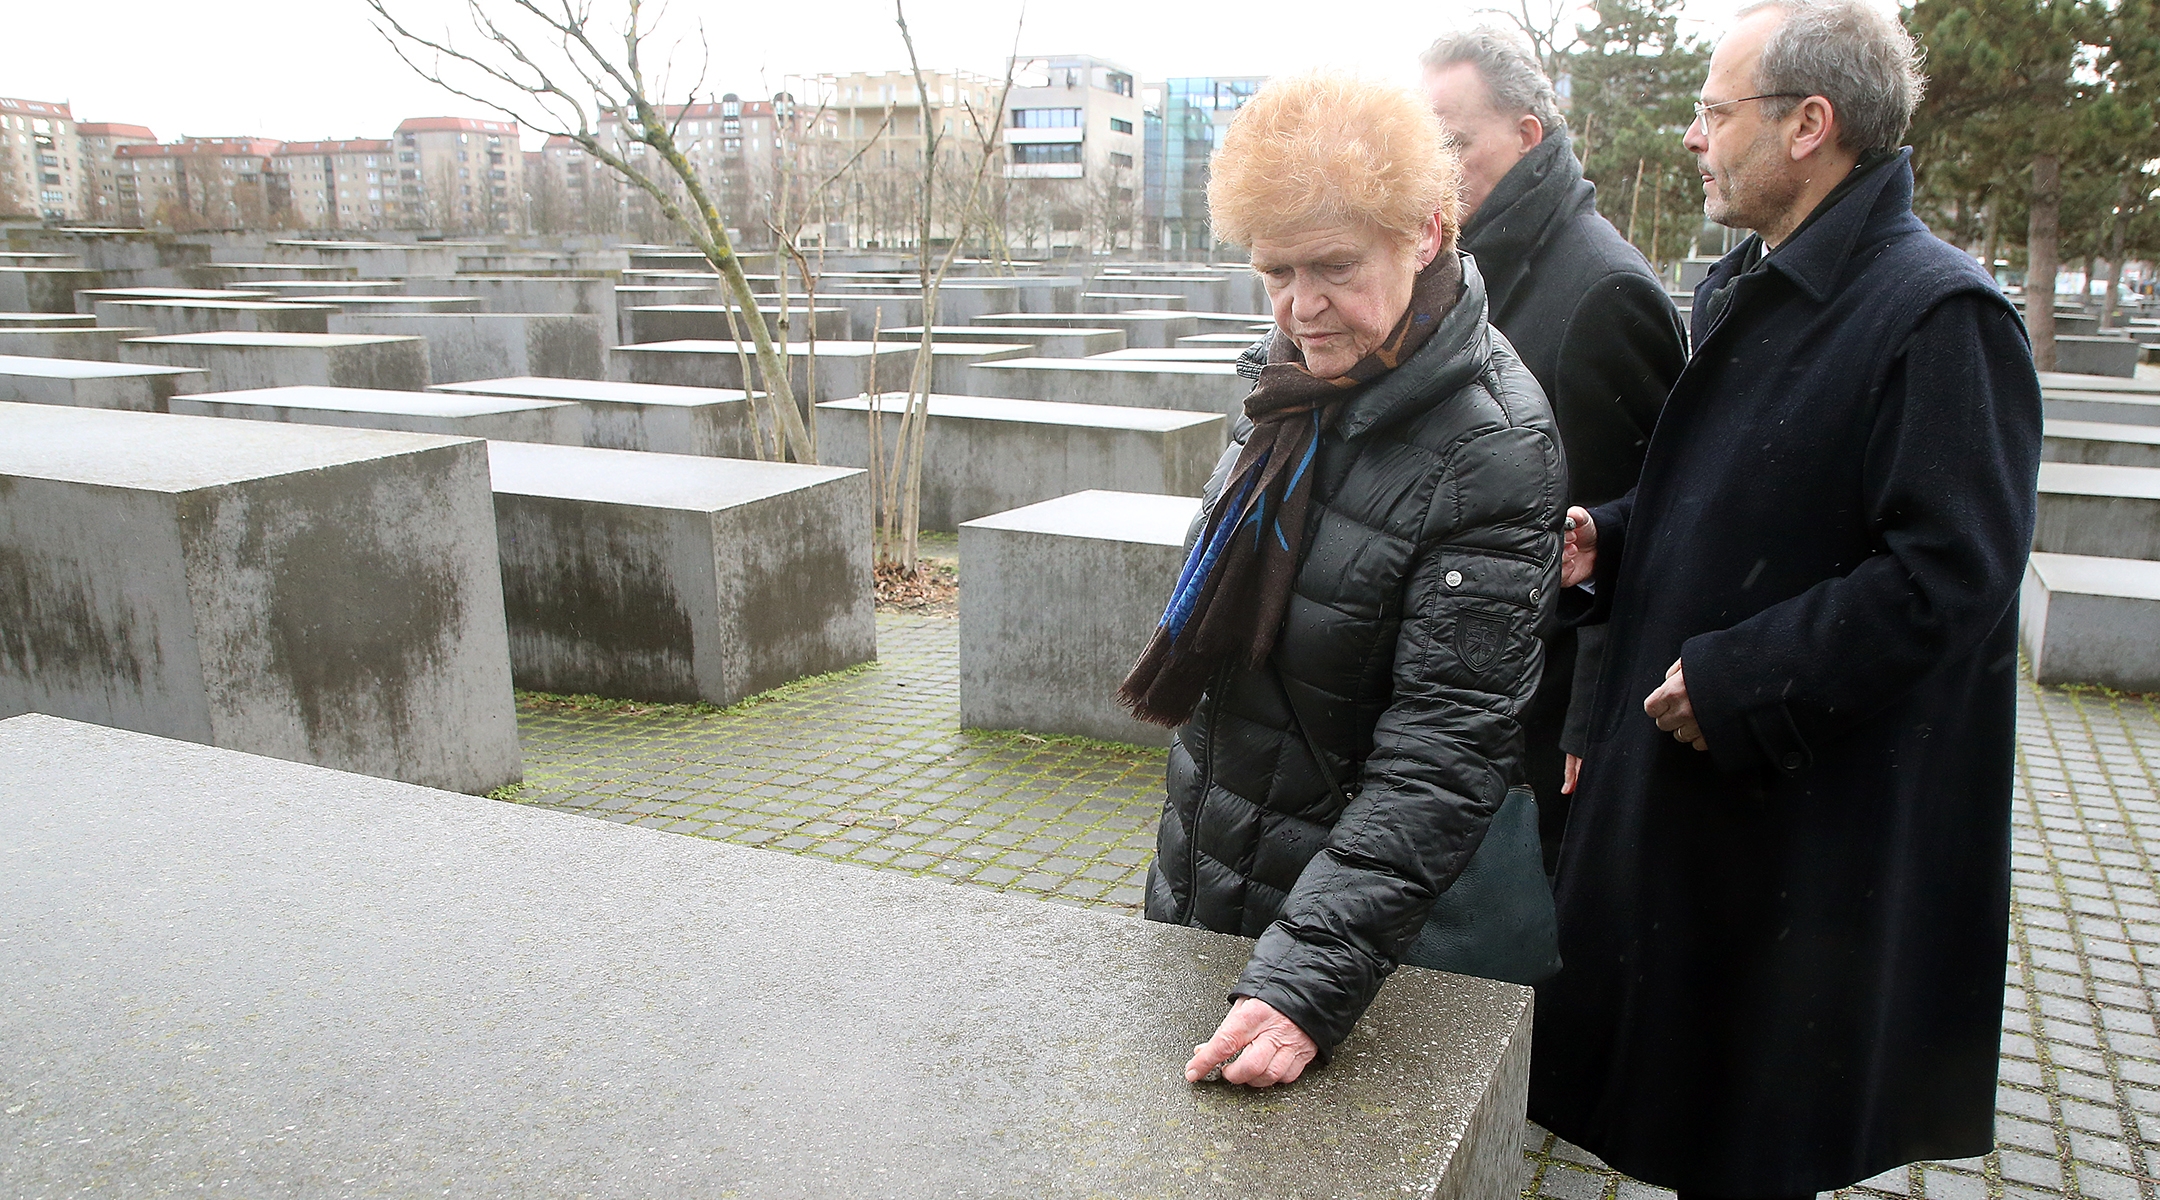 Deborah Lipstadt and Felix Klein visit the Memorial to the Murdered Jews of Europe during a meeting of special envoys and coordinators to combat antisemitism in Berlin, Jan. 30, 2023. (Wolfgang Kumm/picture alliance via Getty Images)